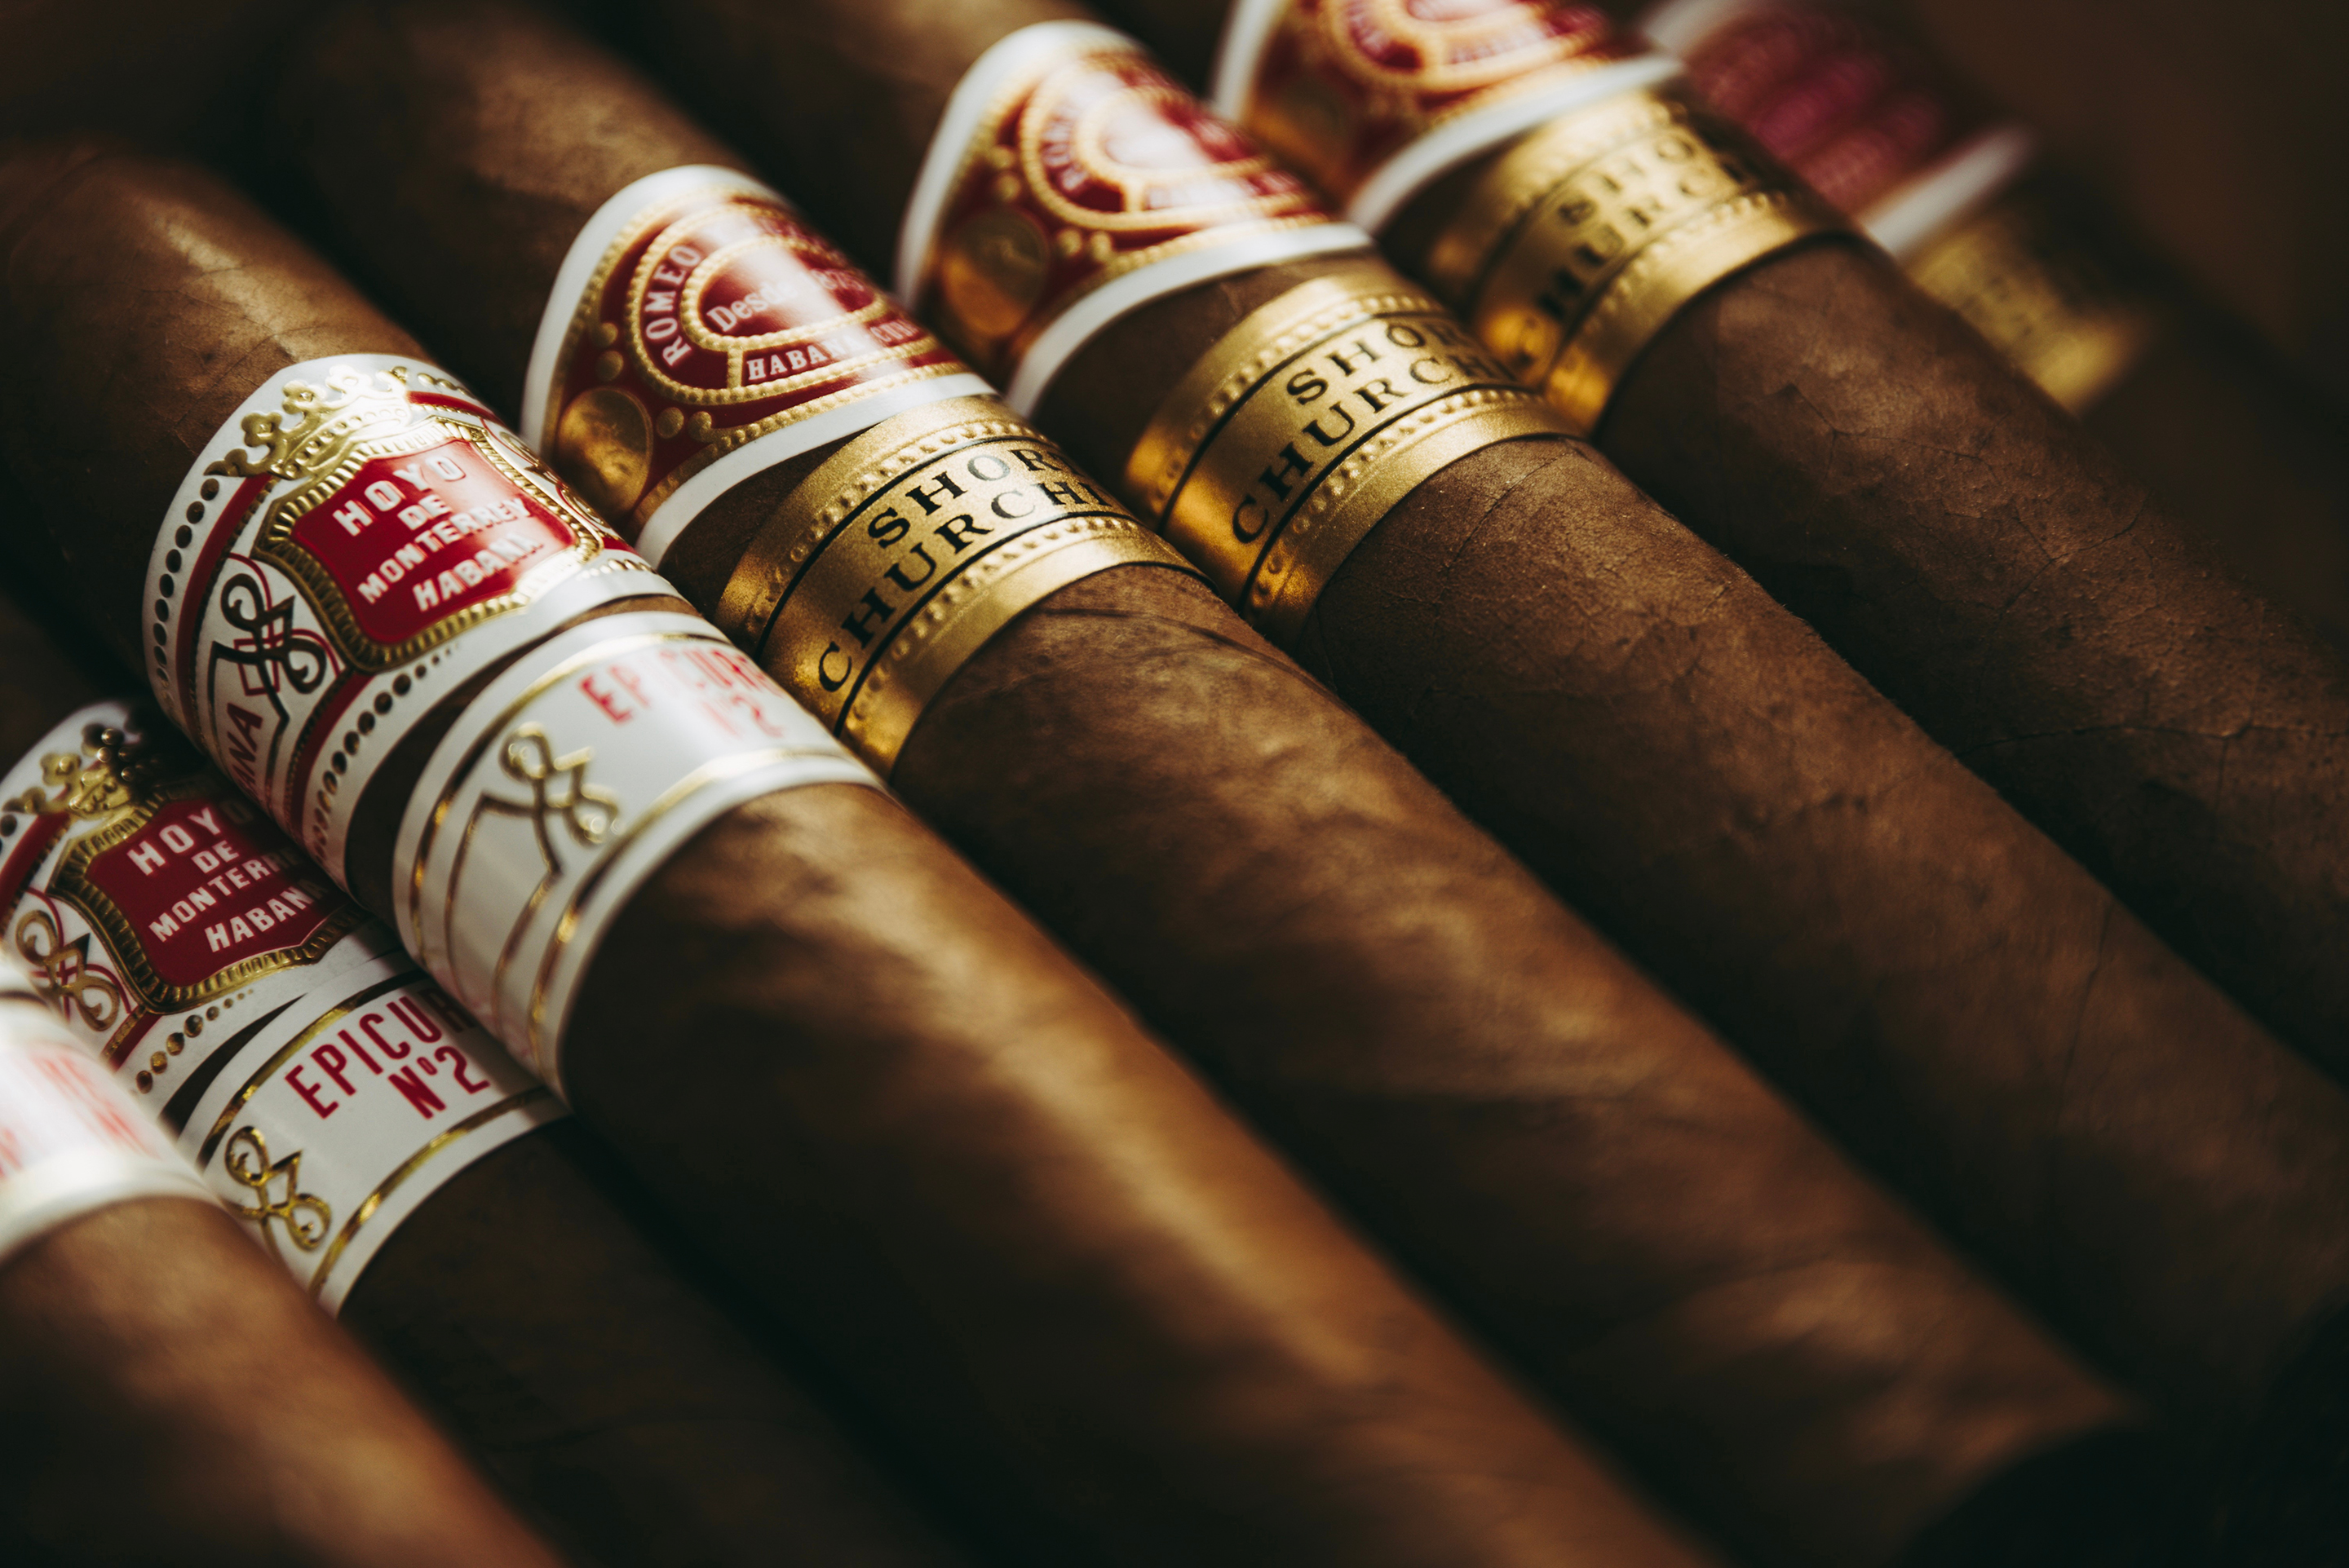 What exactly is a cigar? All about cigars